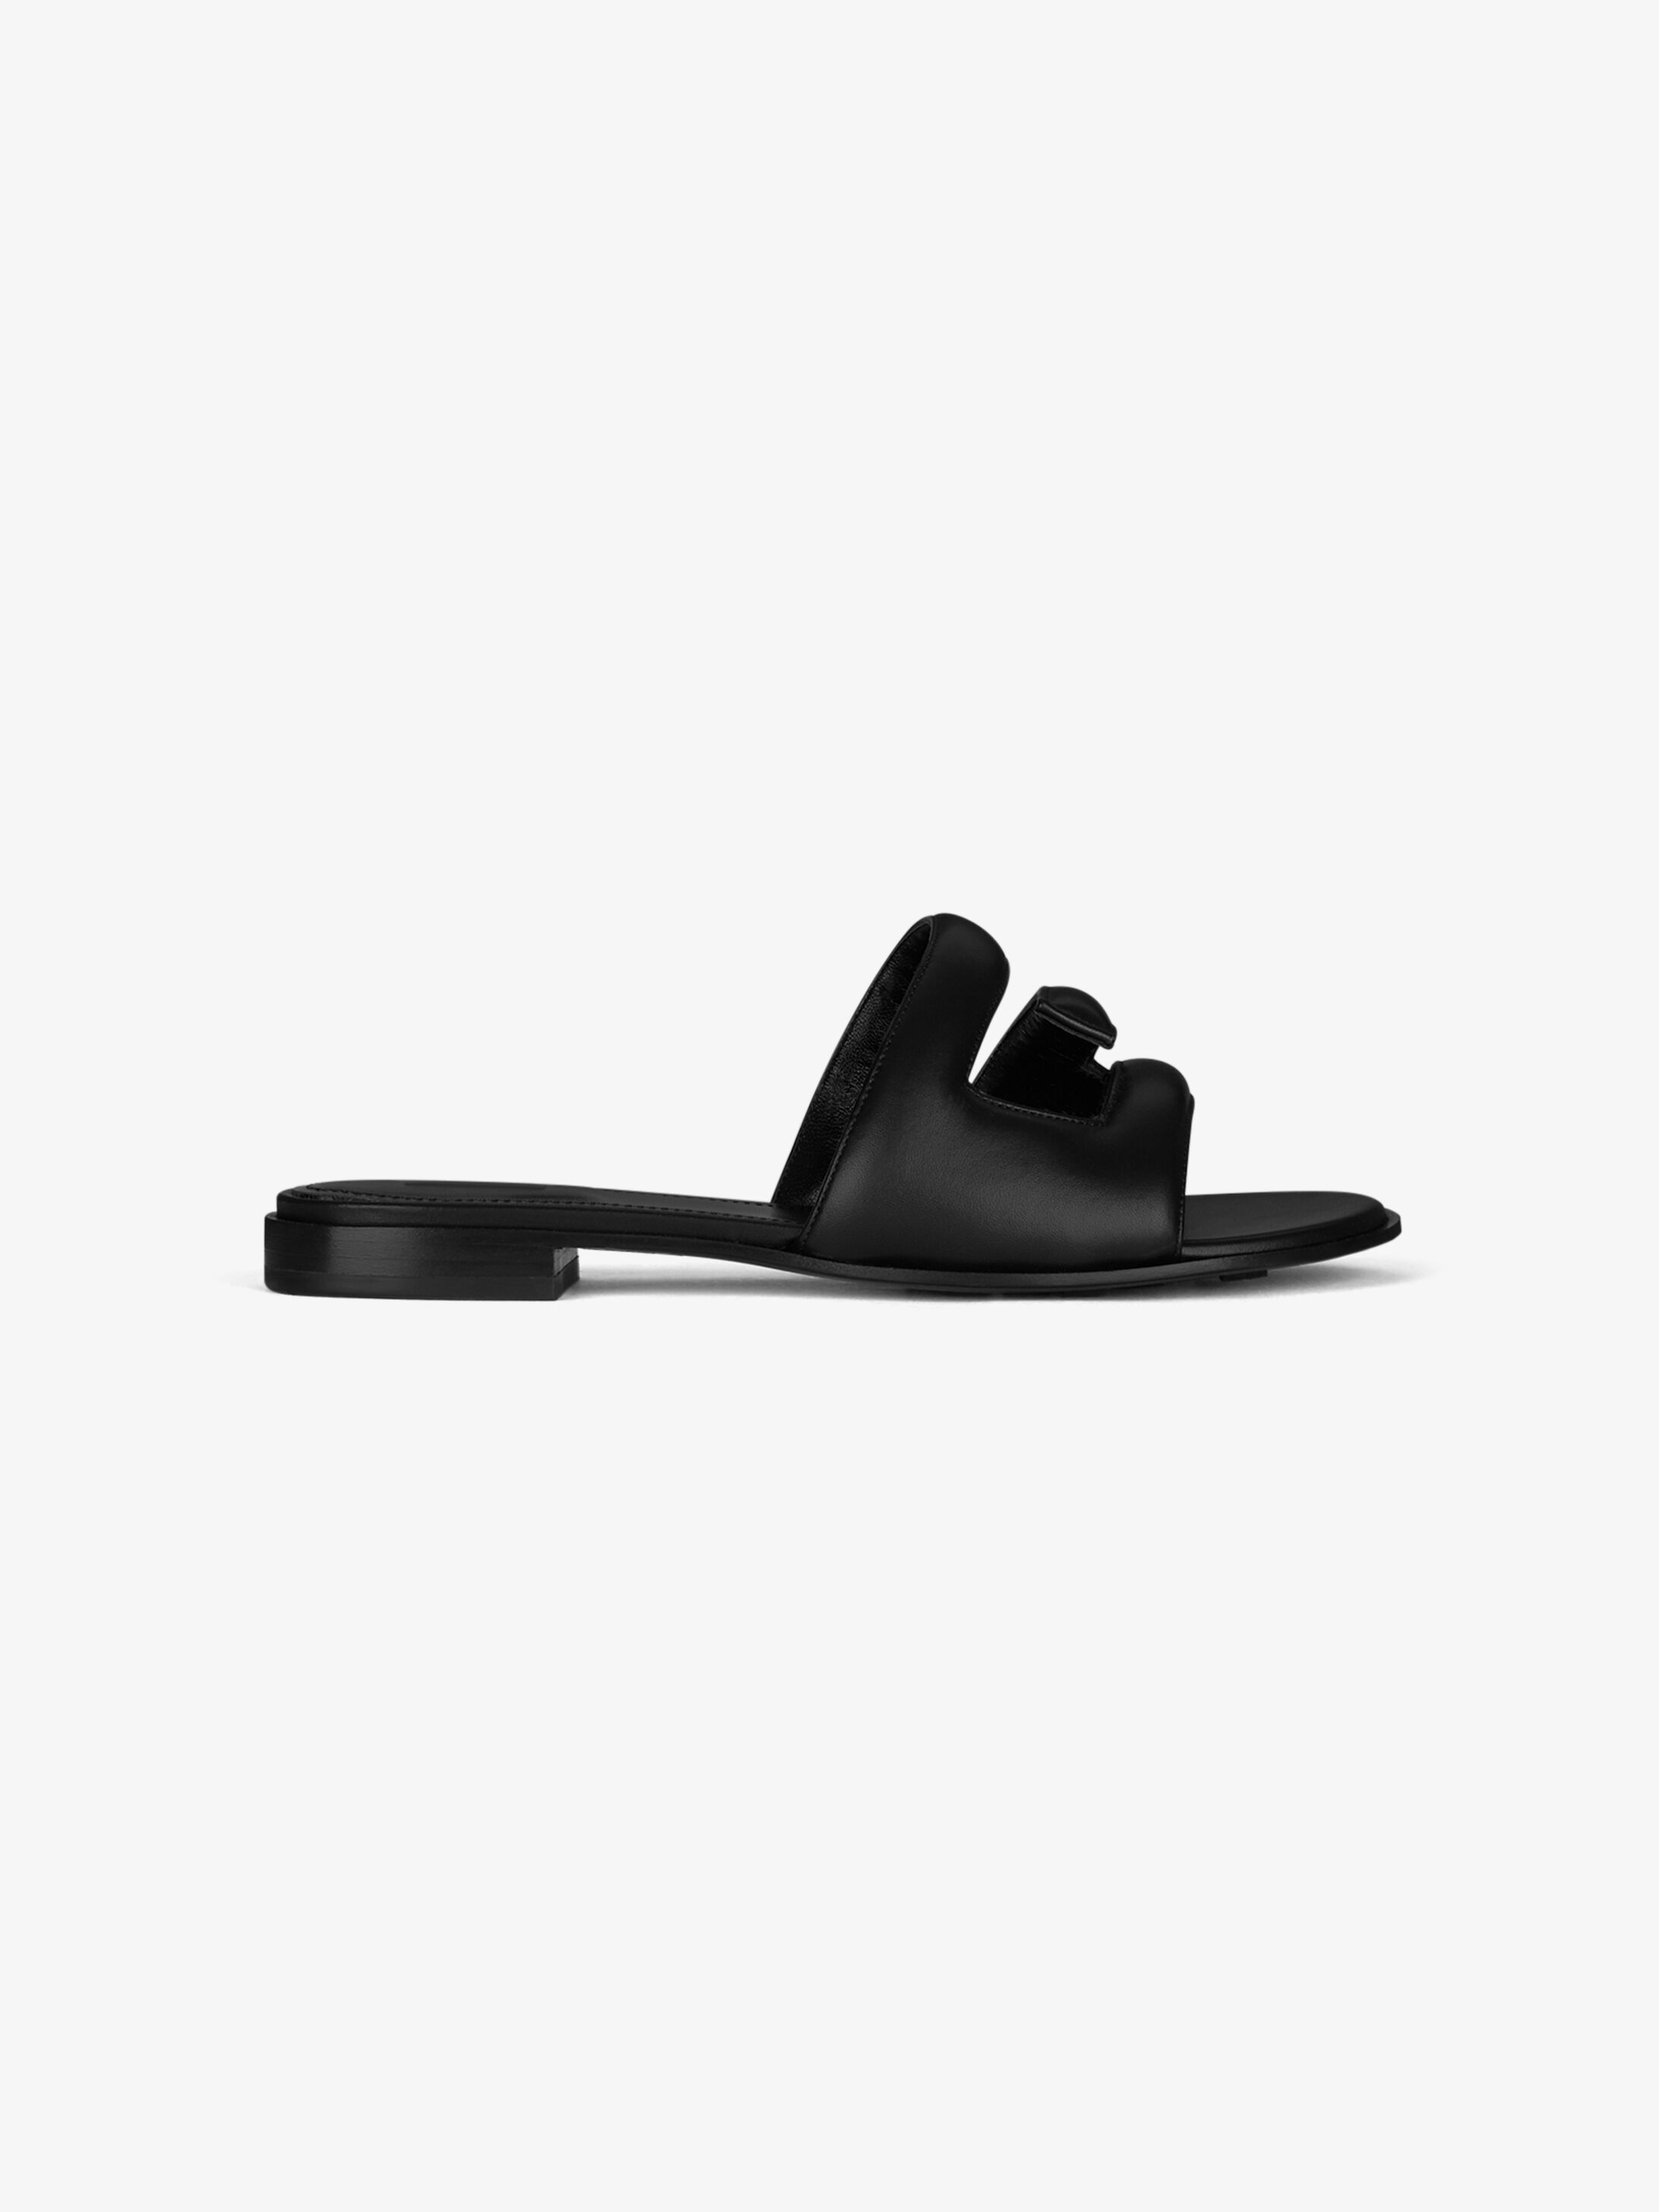 Shoes Givenchy for Women | GIVENCHY Paris | GIVENCHY Paris